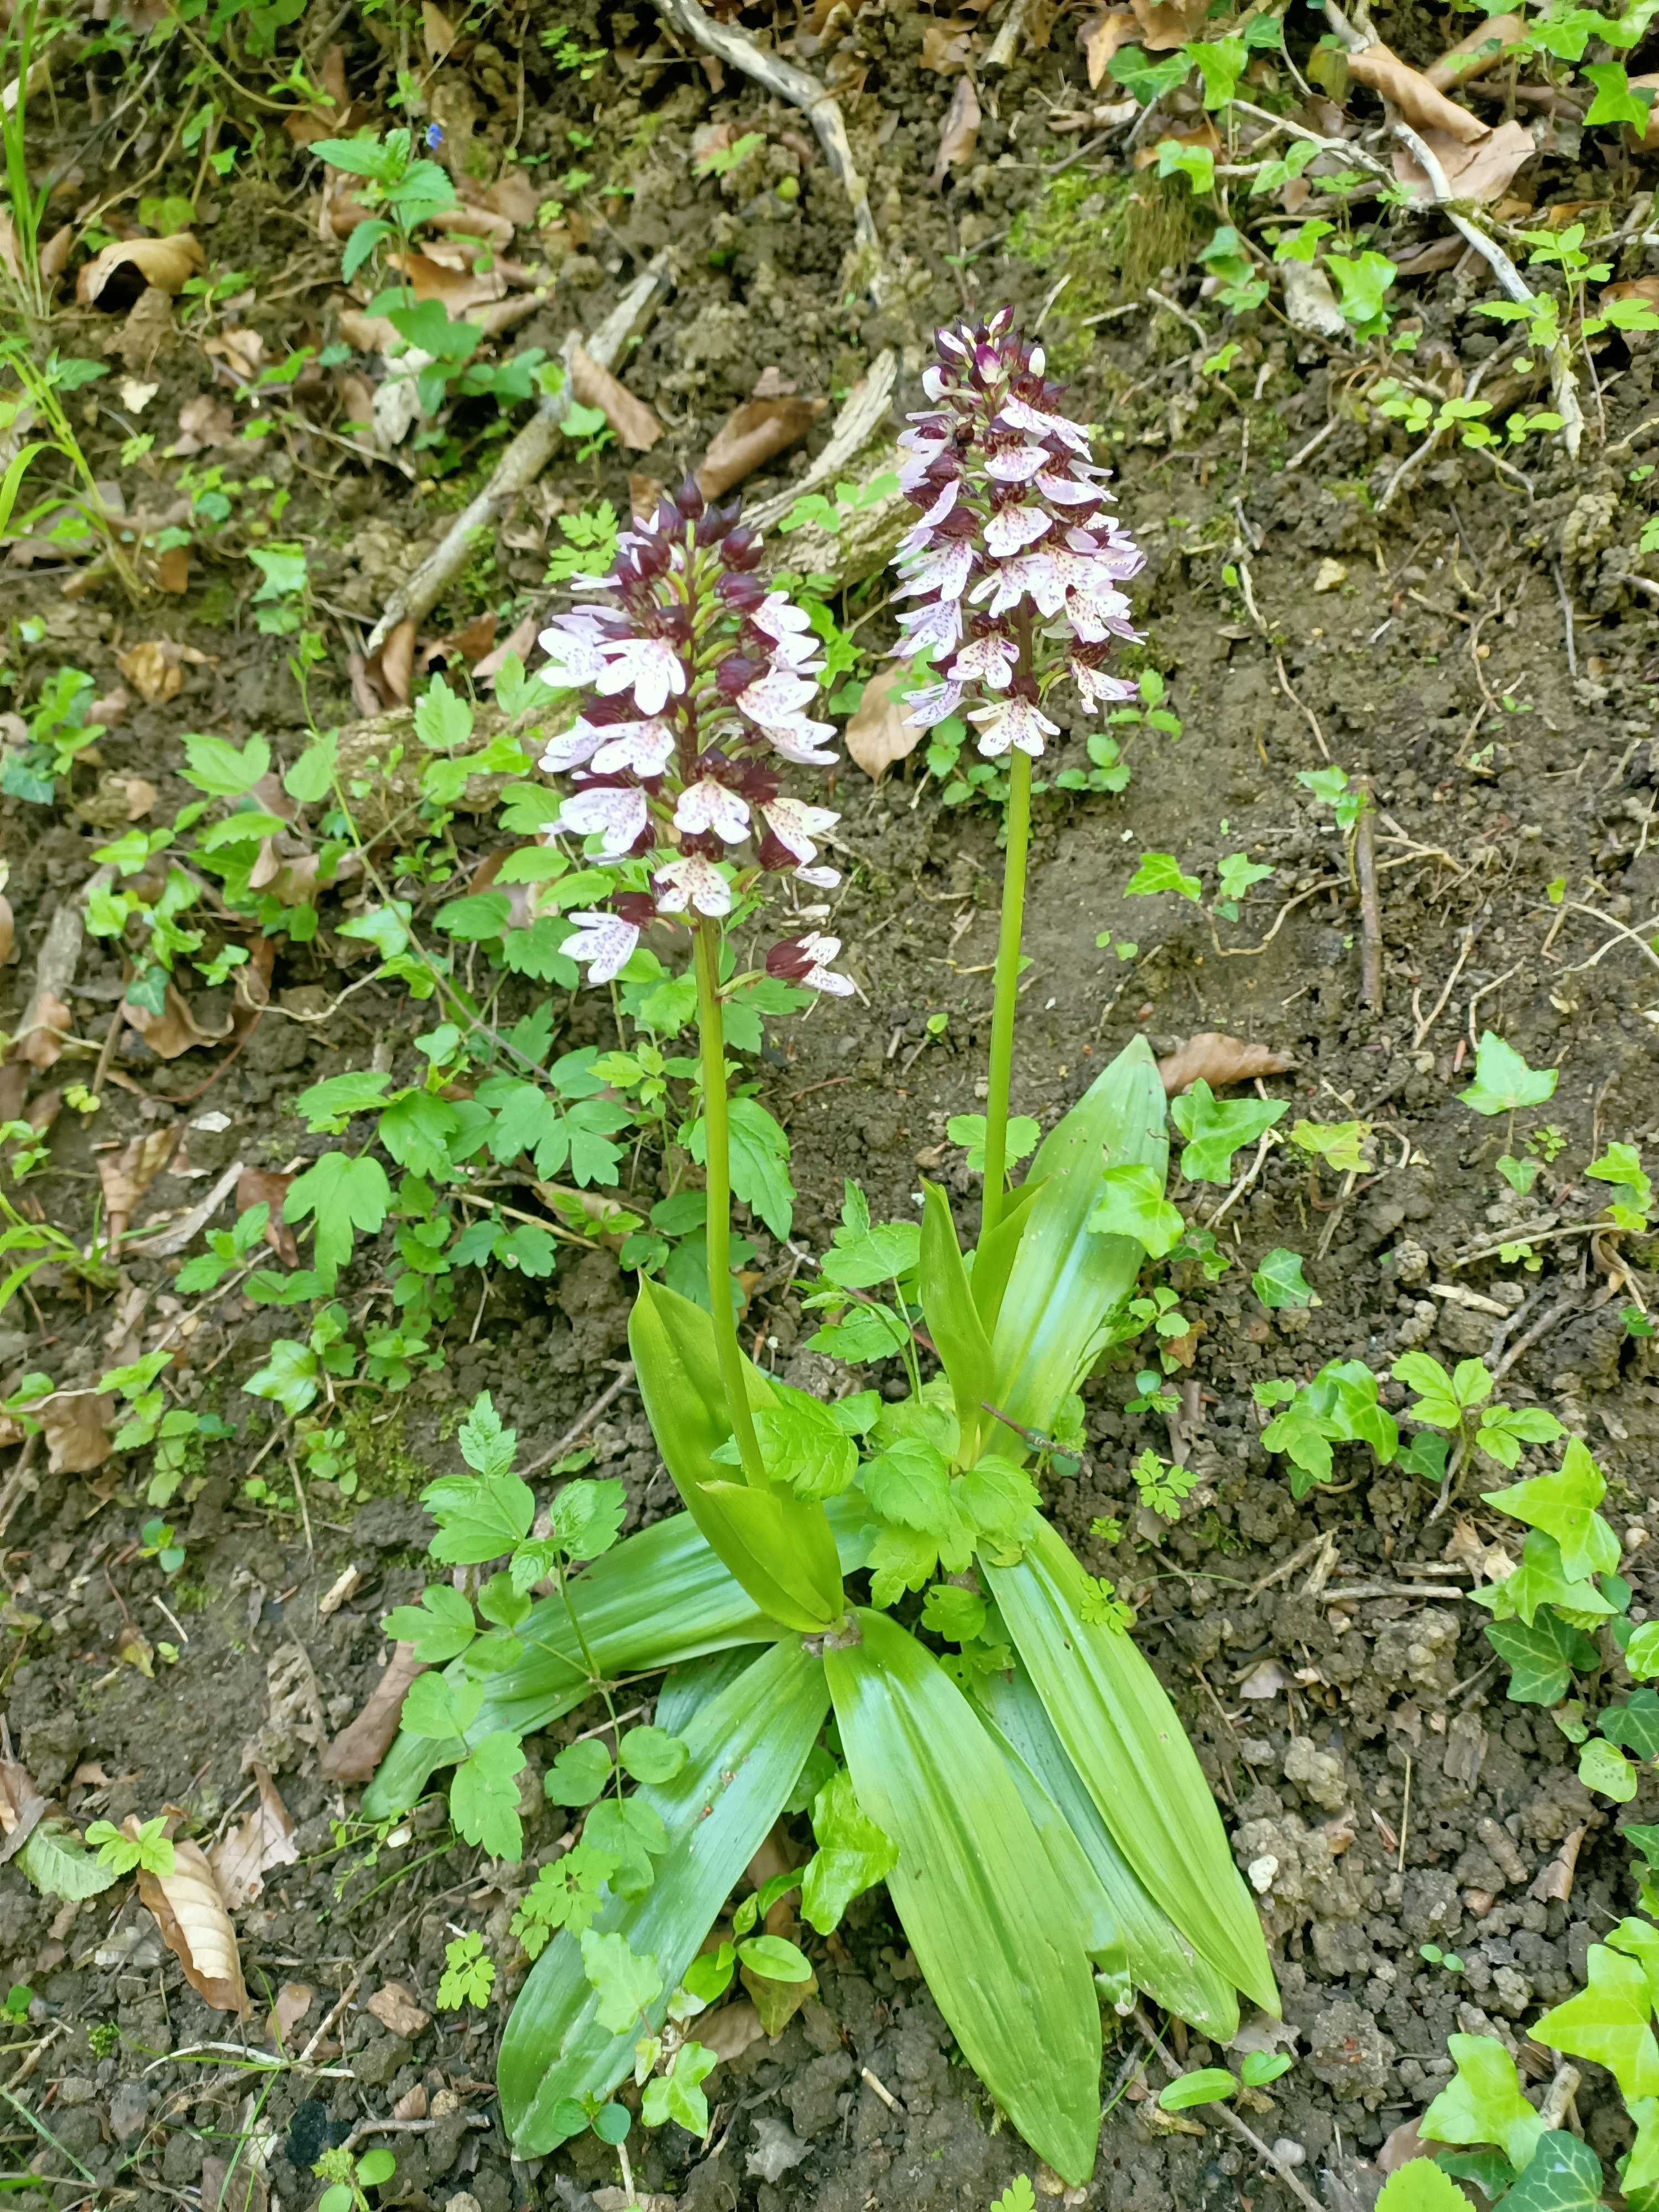 Orchis is a genus in the orchid family (Orchidaceae), occurring mainly in Europe and Northwest Africa.The name is from the Ancient Greek ὄρχις orchis, meaning "testicle", from the appearance of the paired subterranean tuberoids. This one, was found nearby the Performing Arts Forum in St. Erme Outre et Ramecourt on Sunday, May 30, 2021. Photo: Gabriëlle Schleijpen